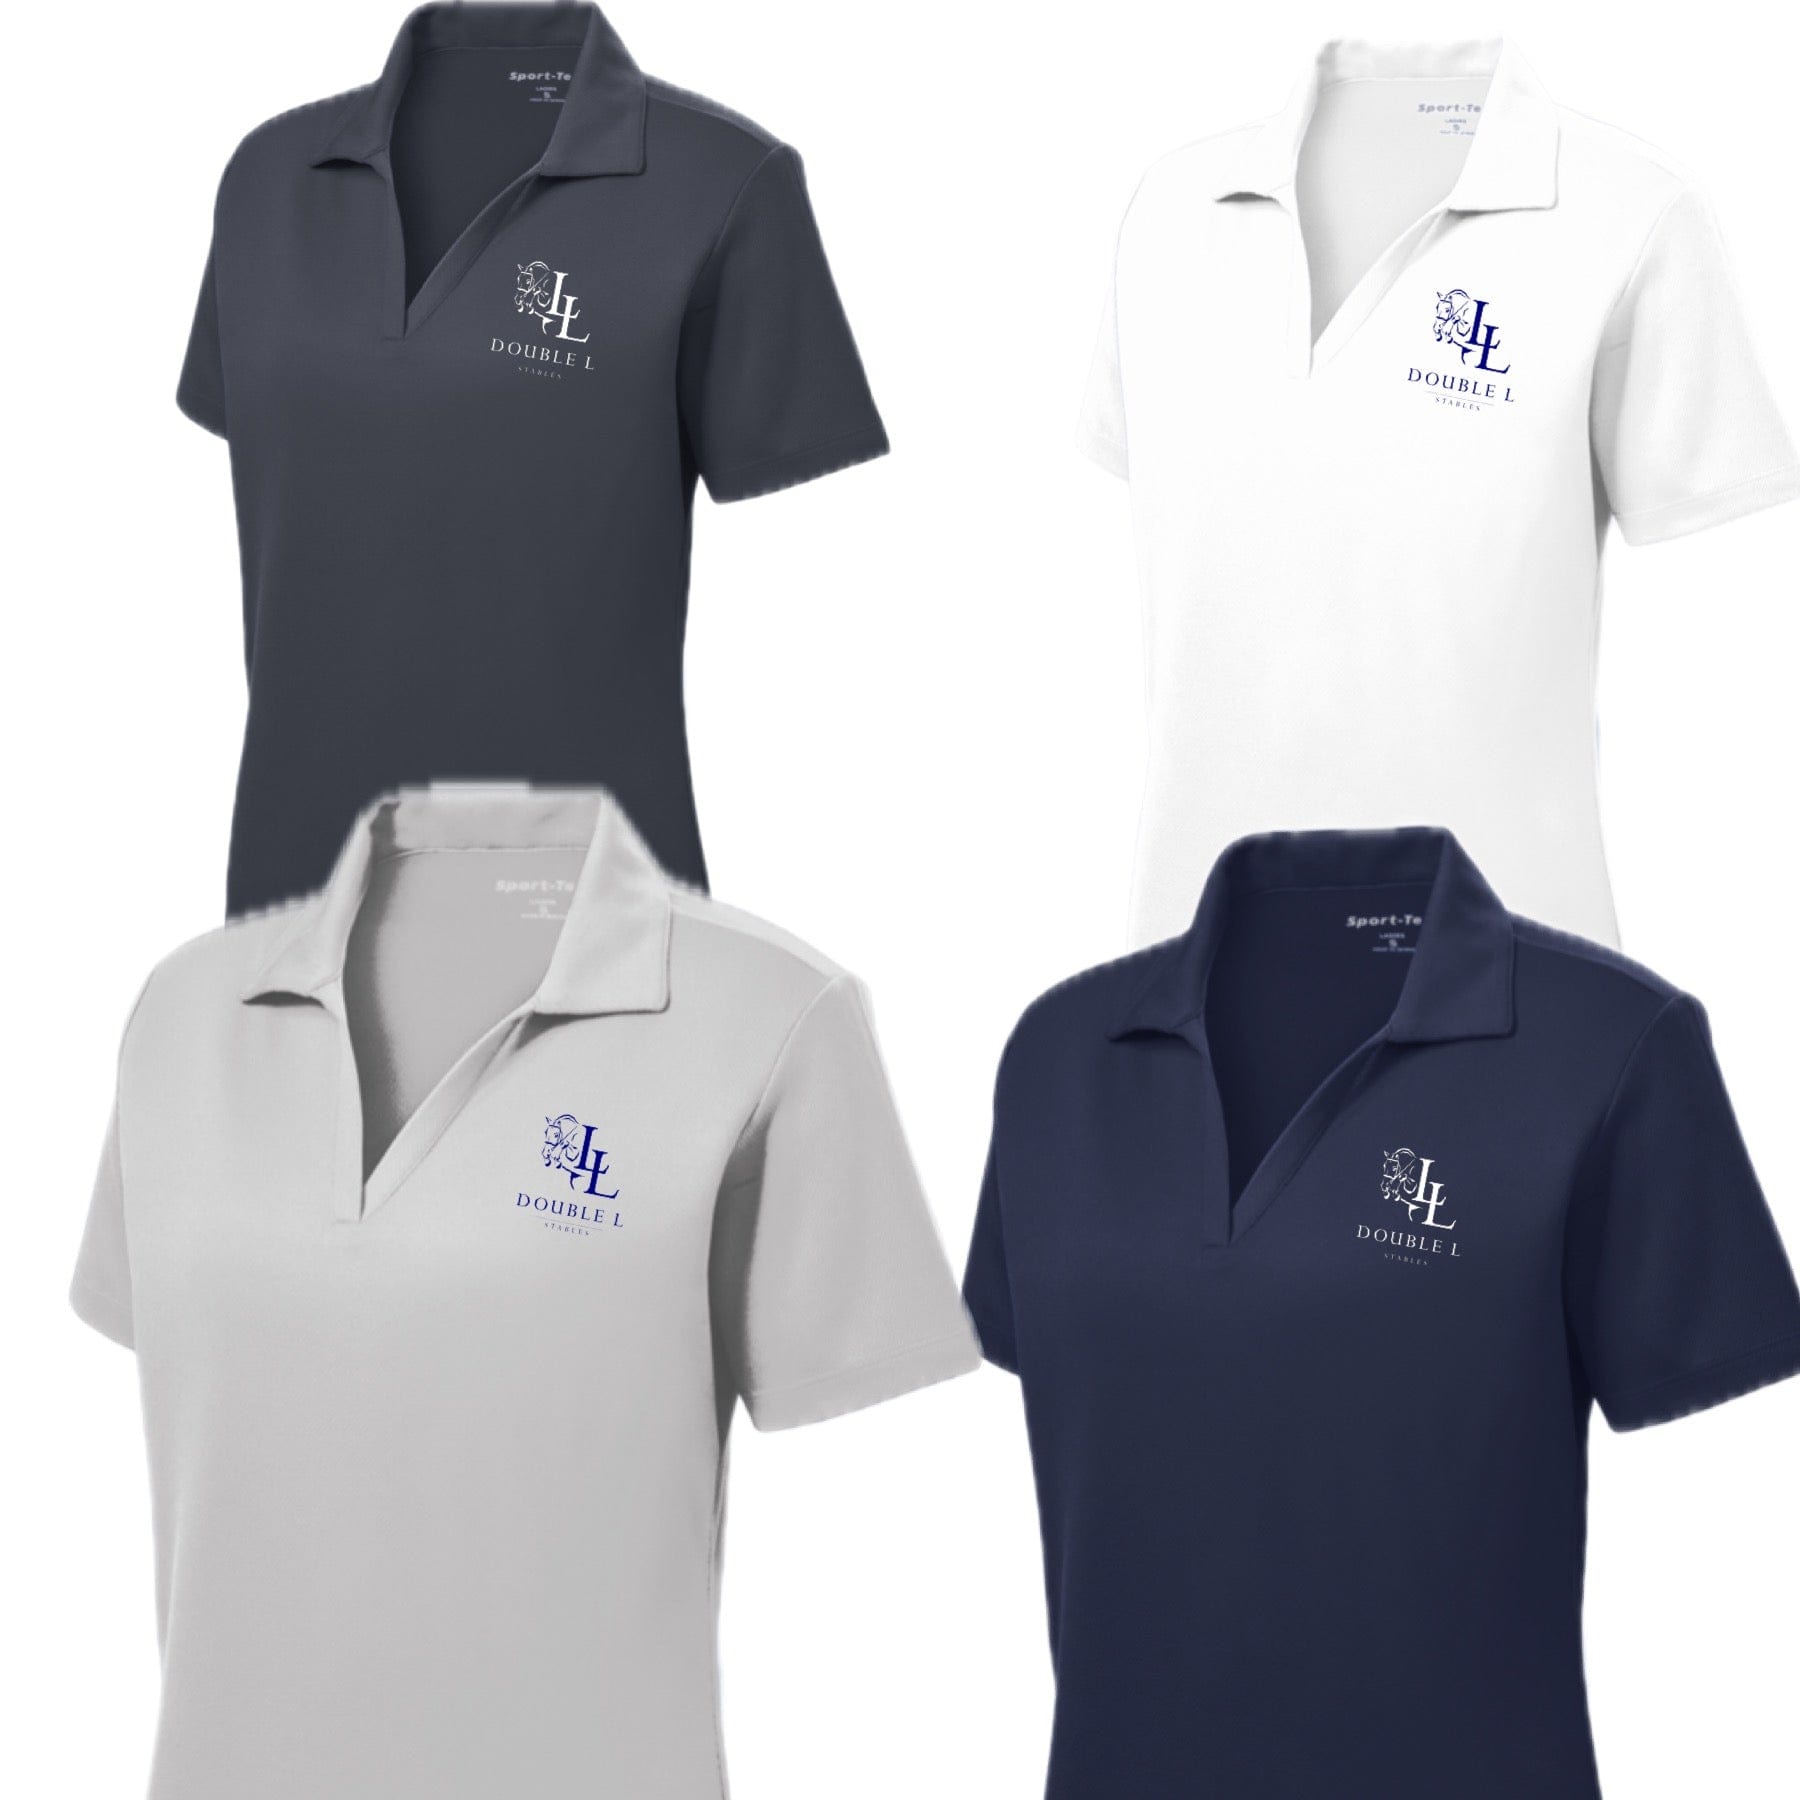 Equestrian Team Apparel Double L Stables Polo Shirts equestrian team apparel online tack store mobile tack store custom farm apparel custom show stable clothing equestrian lifestyle horse show clothing riding clothes horses equestrian tack store